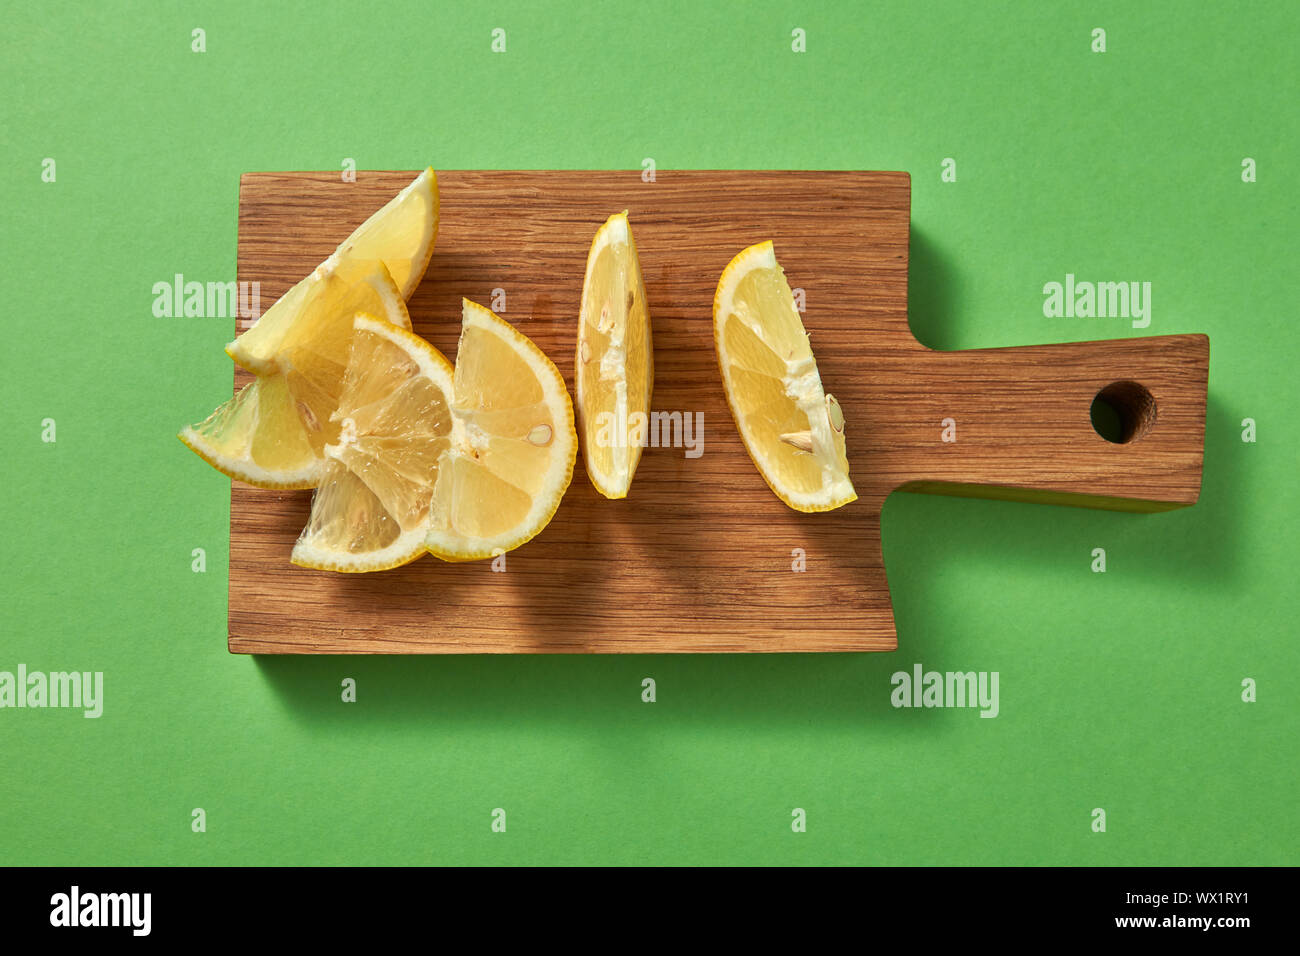 Slices of juicy ripe natural yellow lemon on a wooden board on a green background. Top view. Stock Photo